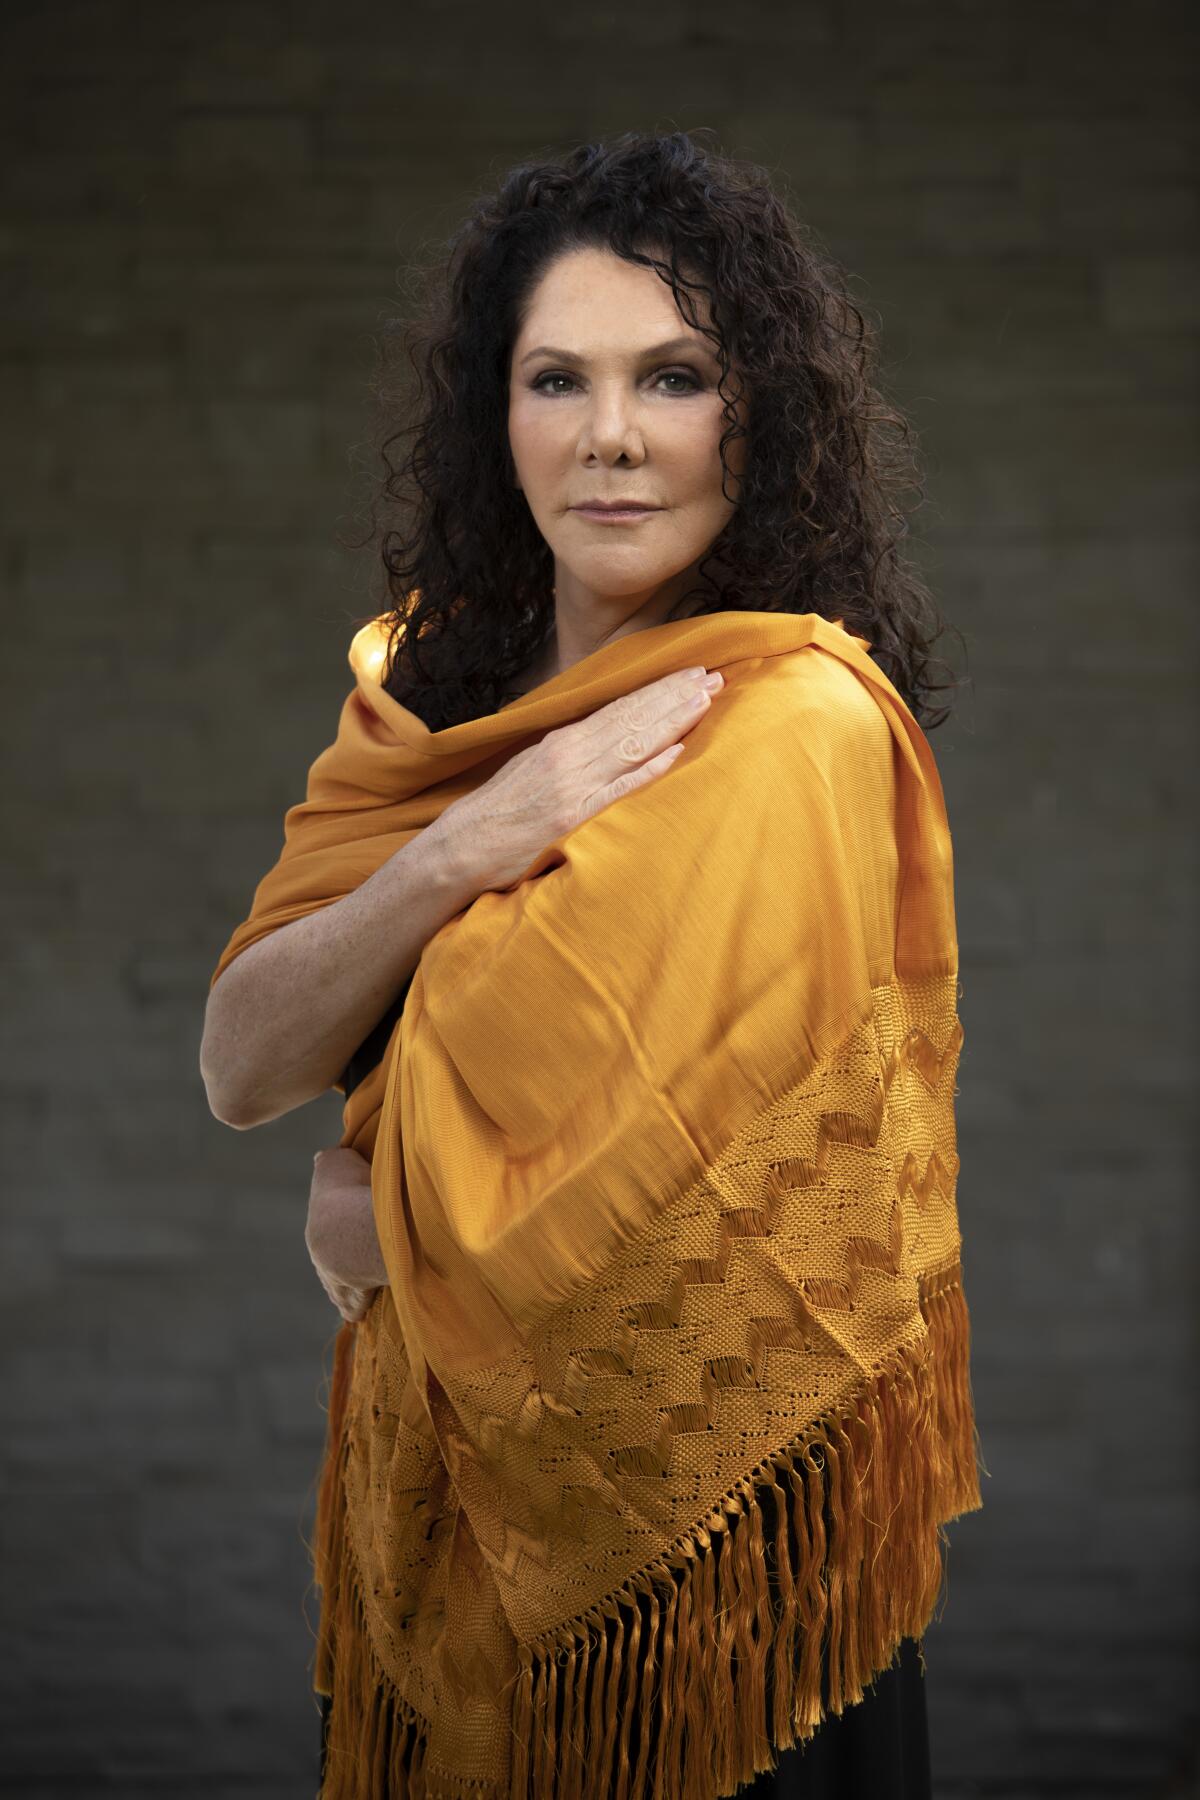 Author Maria Amparo Escandón stands wrapped in a gold shawl.